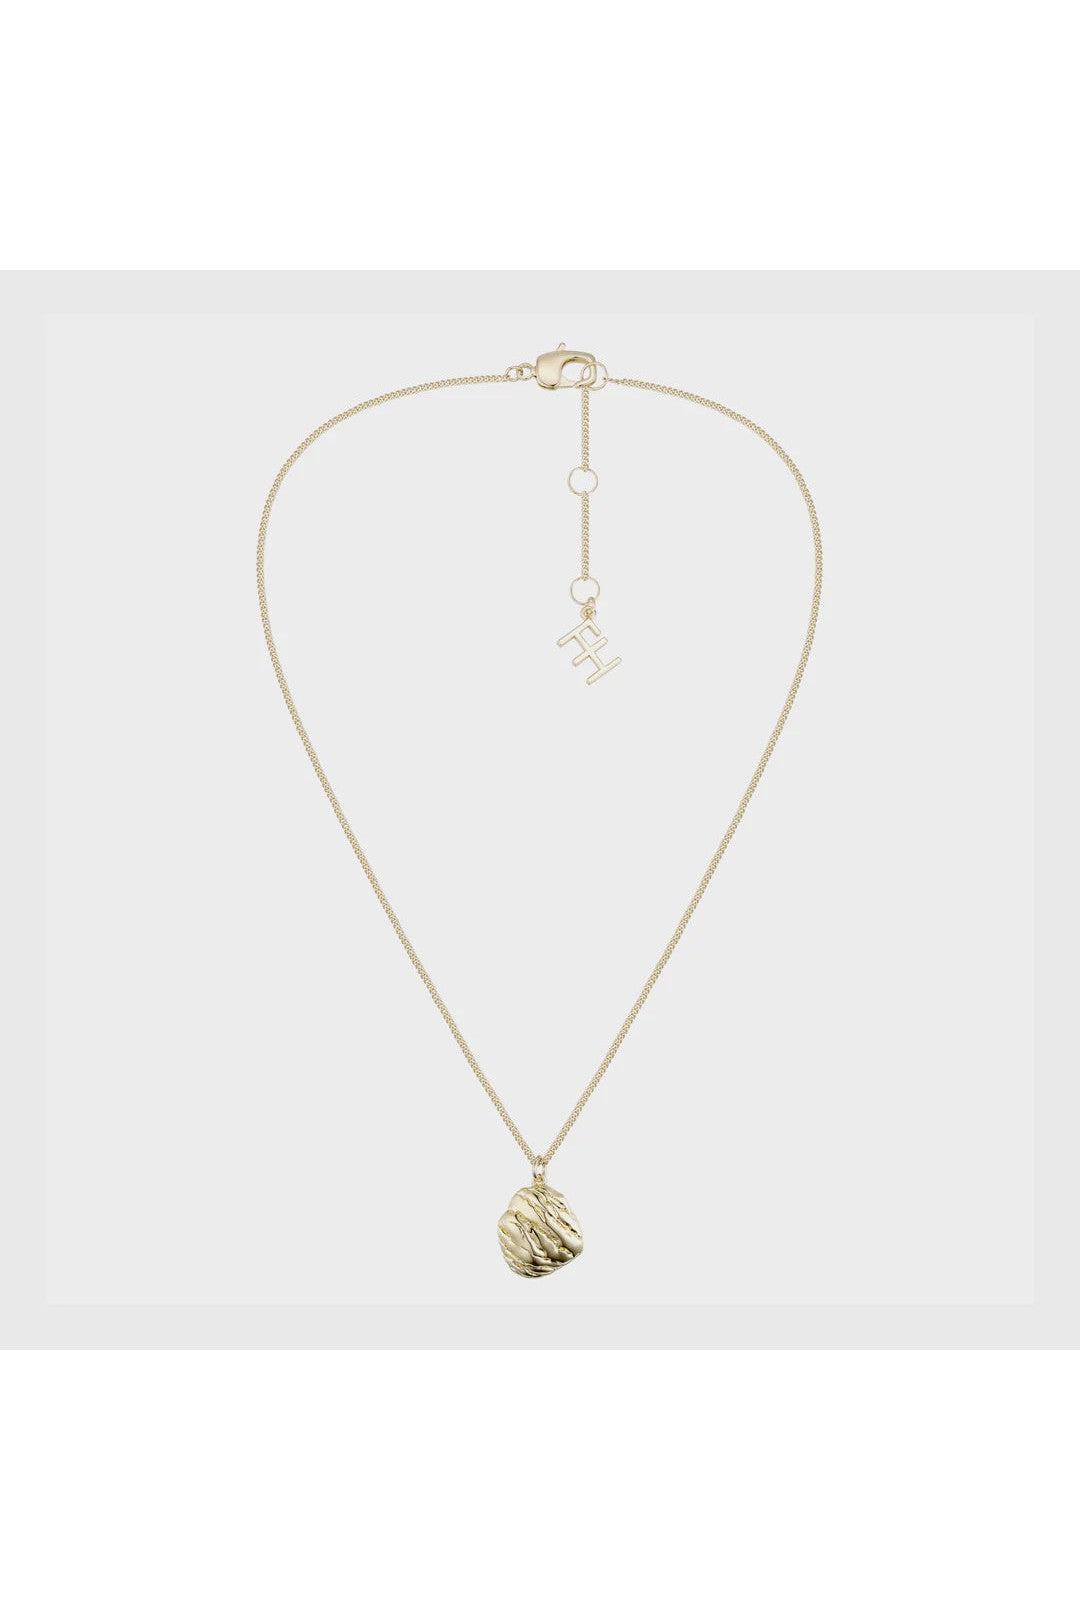 Oyster shell necklace, gold